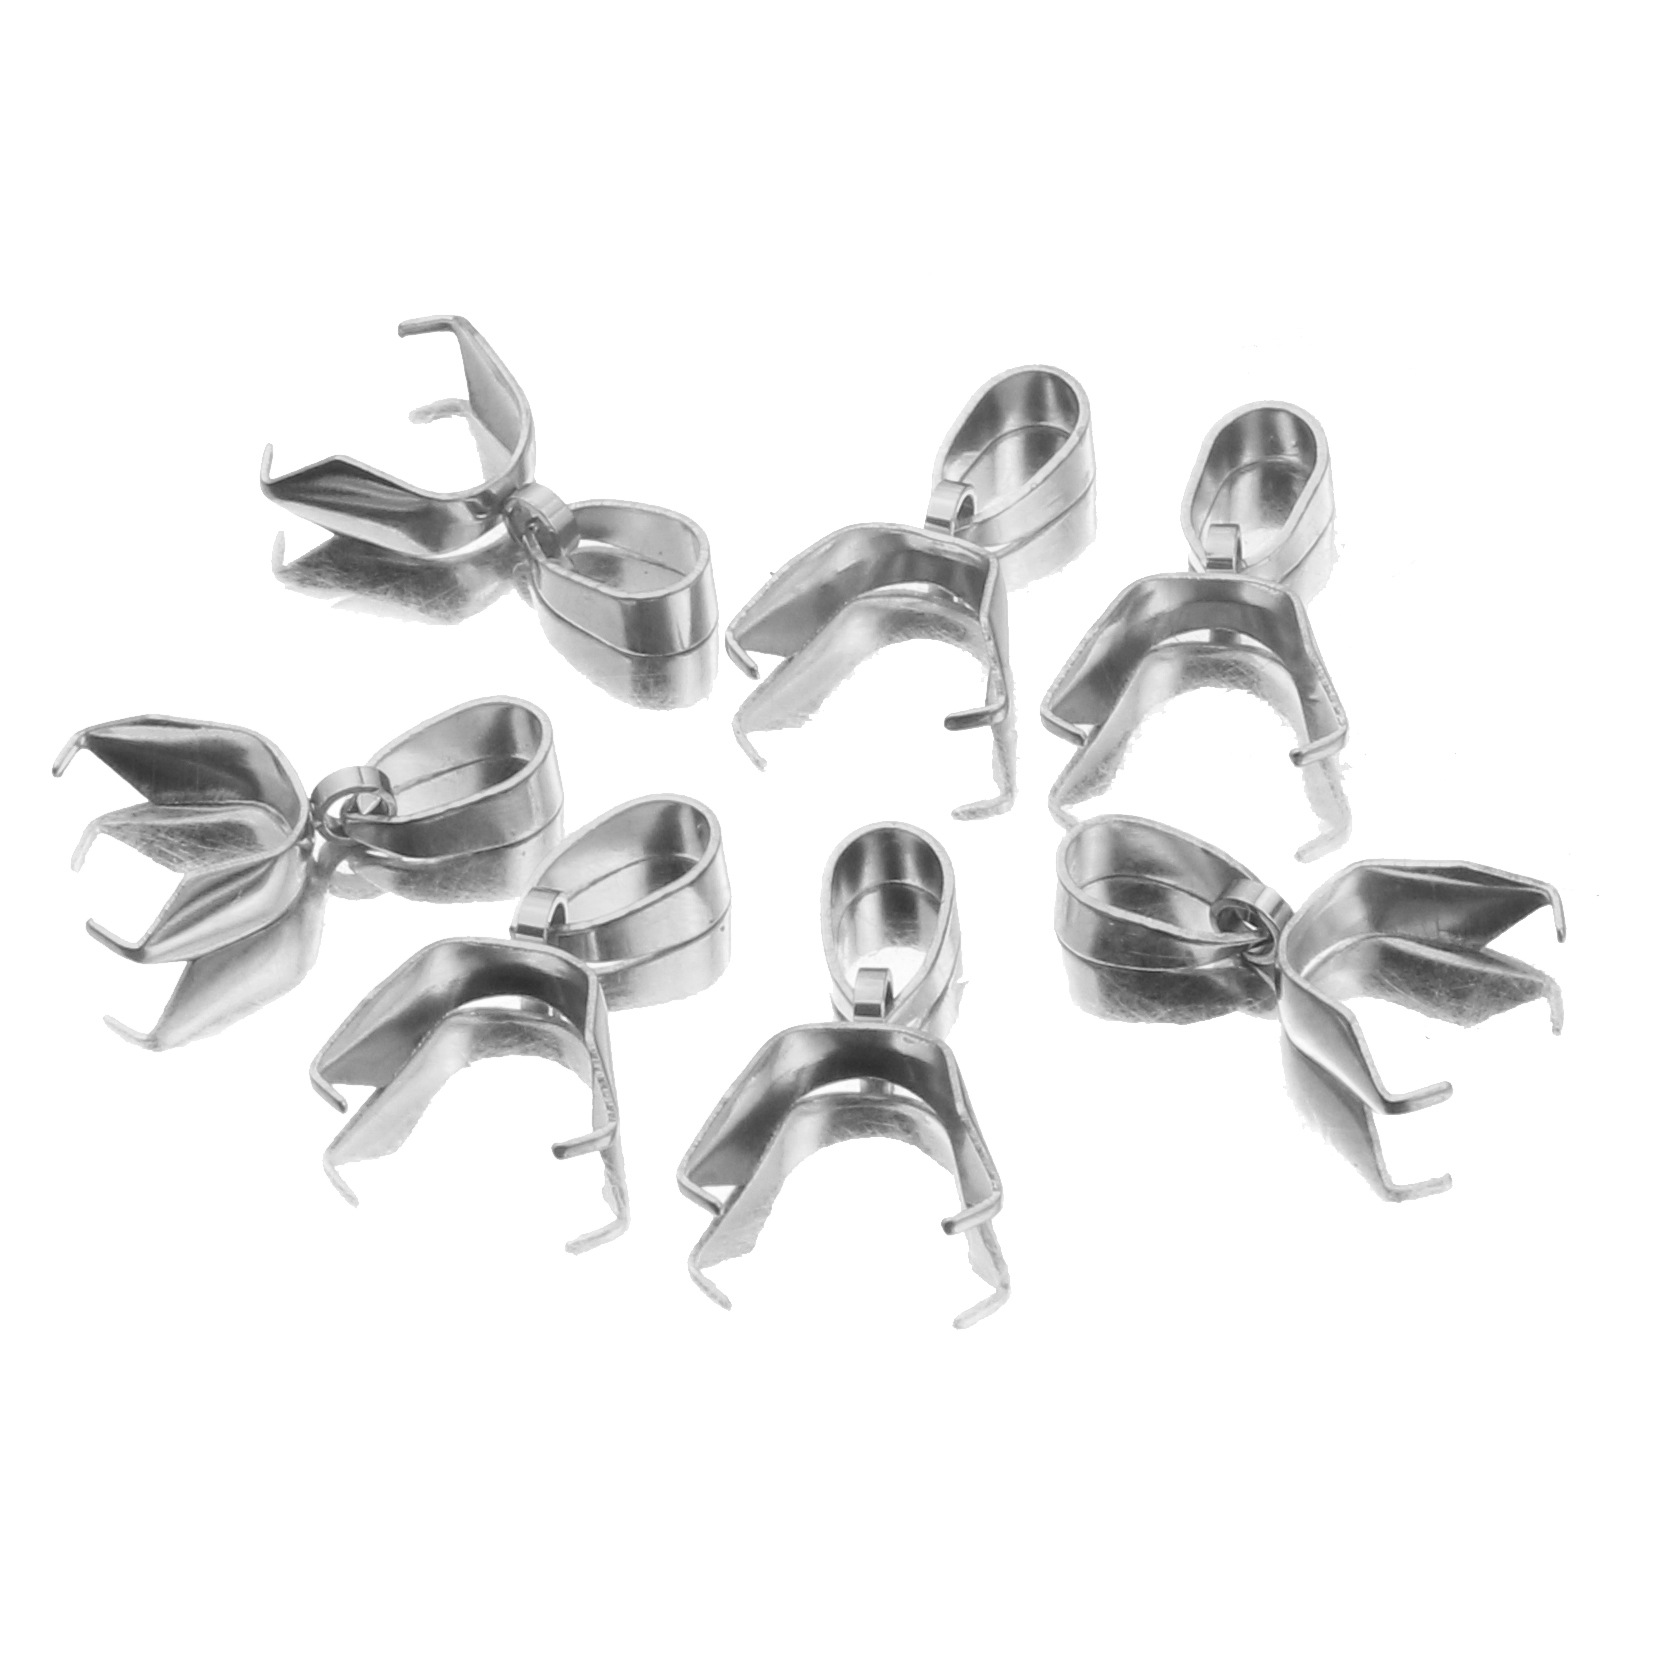 Stainless steel natural color Small 2.5X13mm